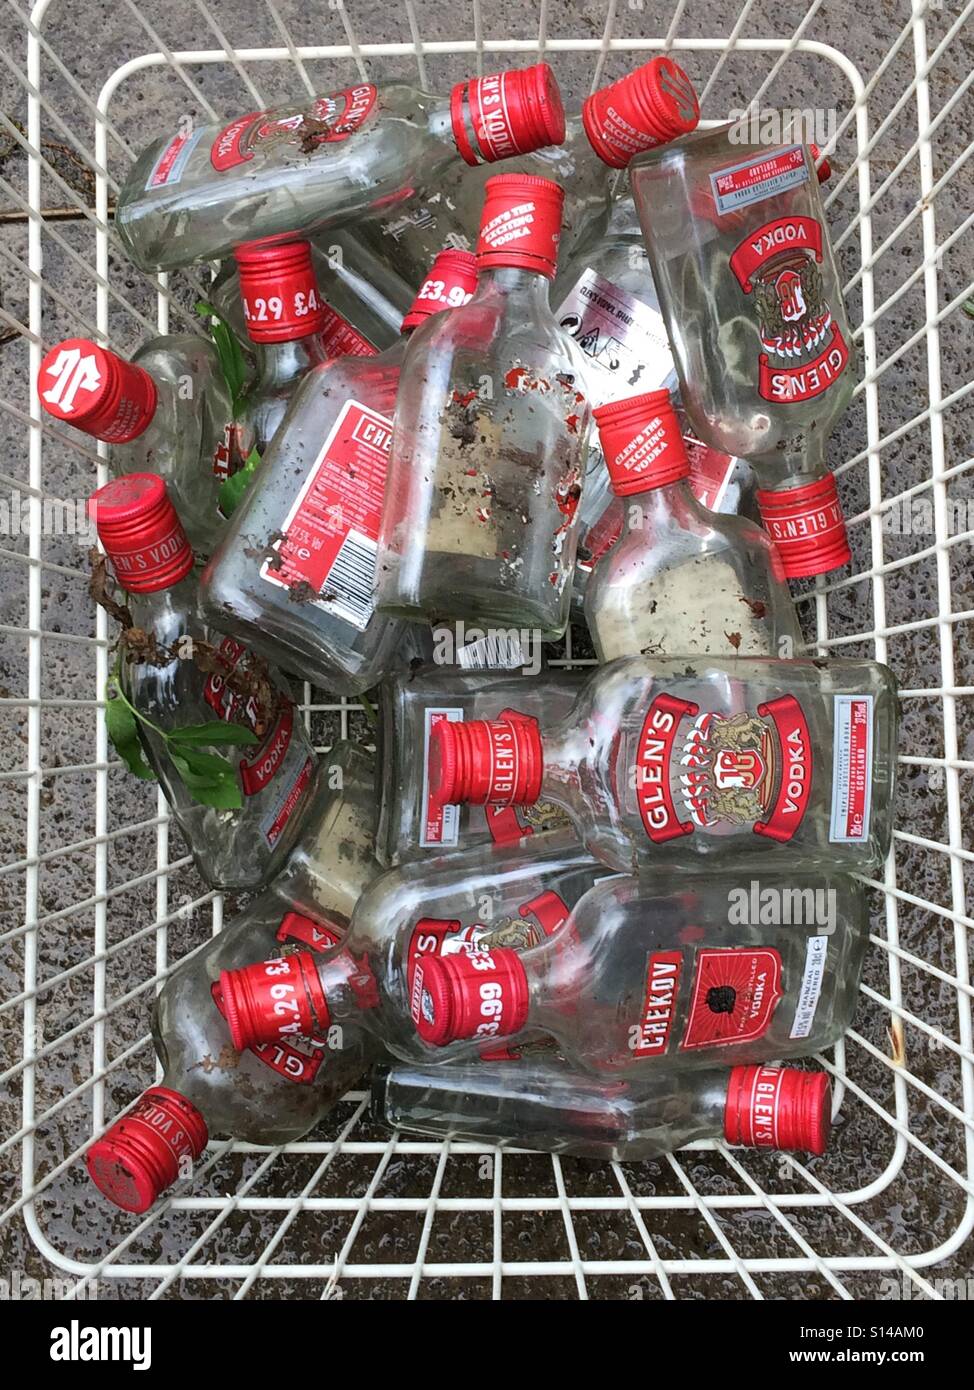 Vodka bottles found while clearing a hedge Stock Photo